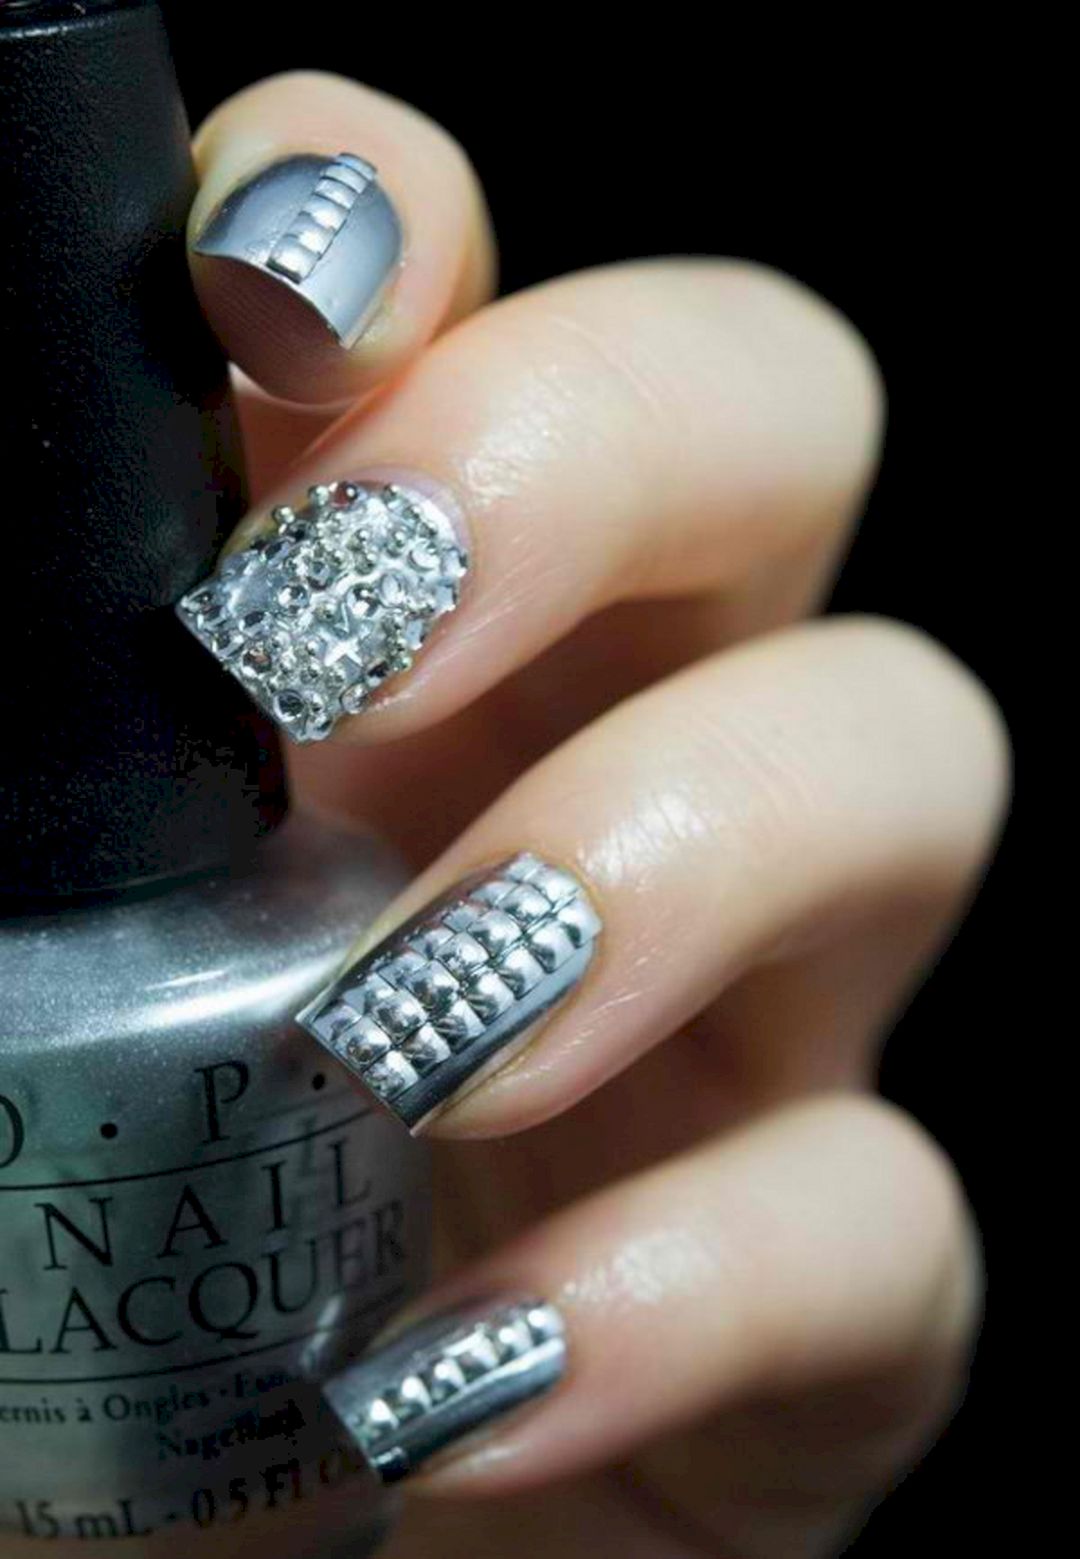 Heavy metal nail art from worldoffemale